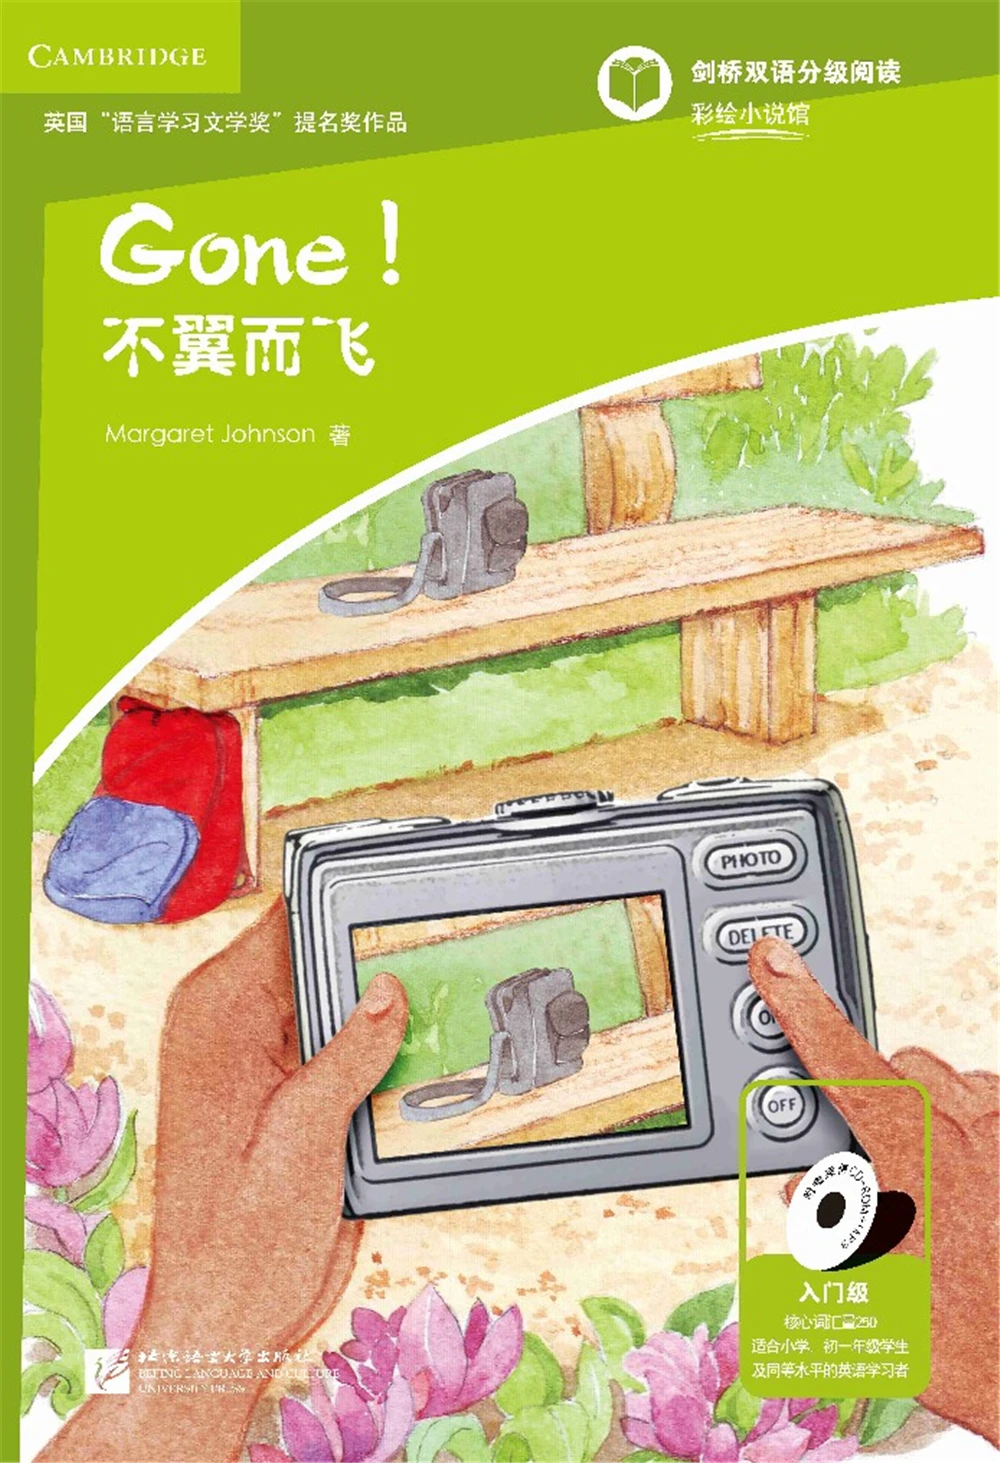 

School & Educational English book (Entry-level Cambridge KET exam supporting reading materials, 250 words or more) [Gone!]